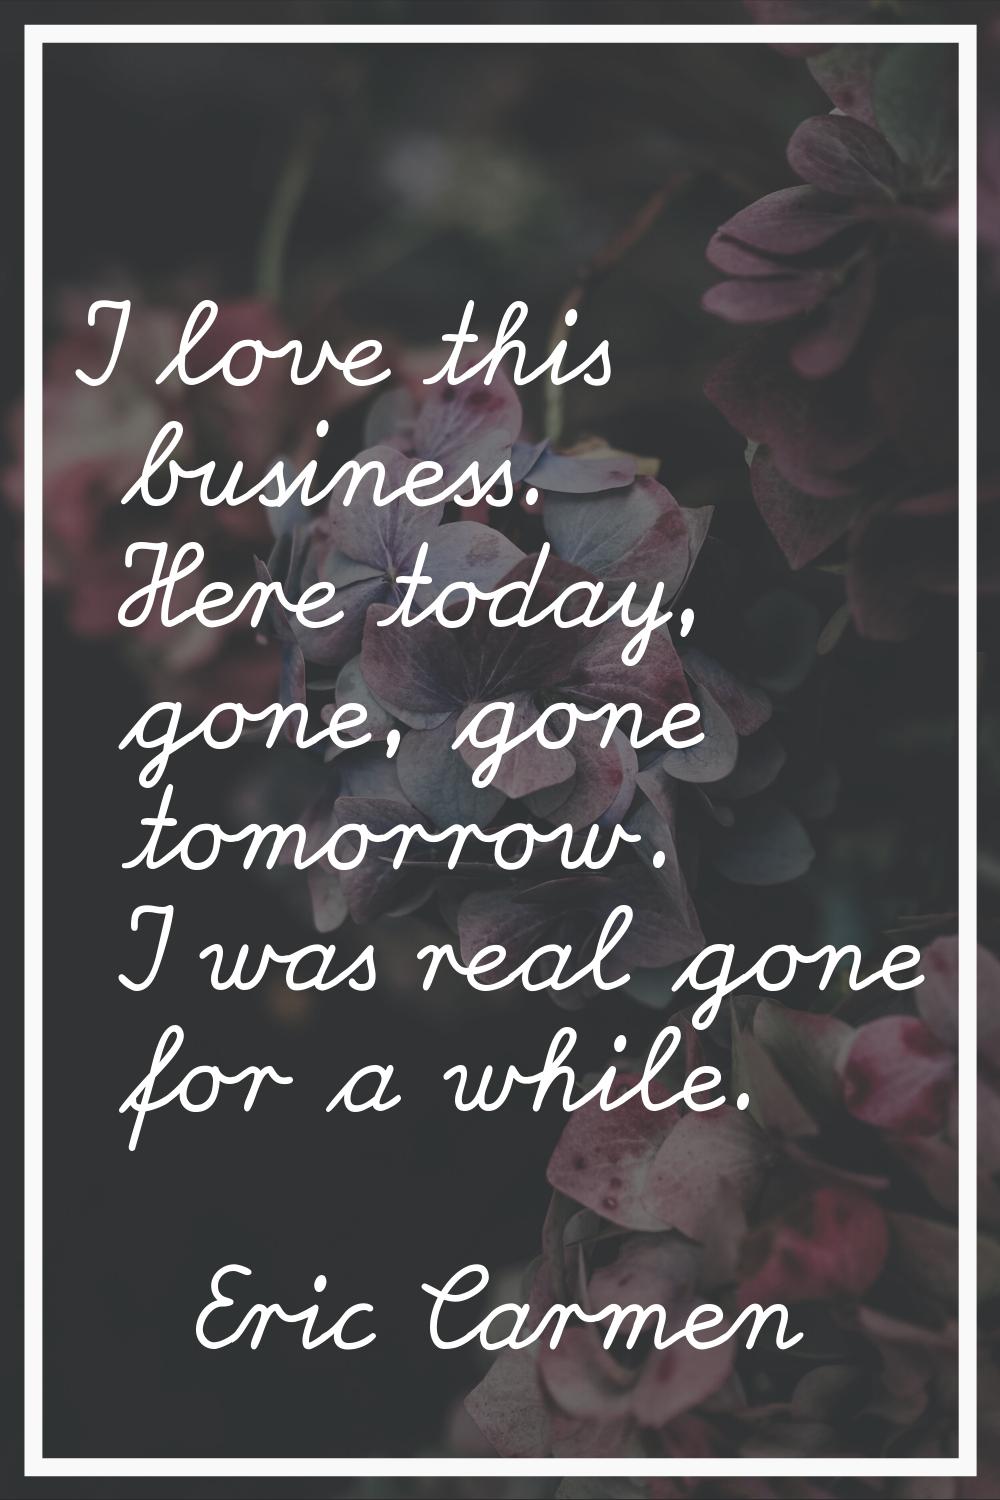 I love this business. Here today, gone, gone tomorrow. I was real gone for a while.